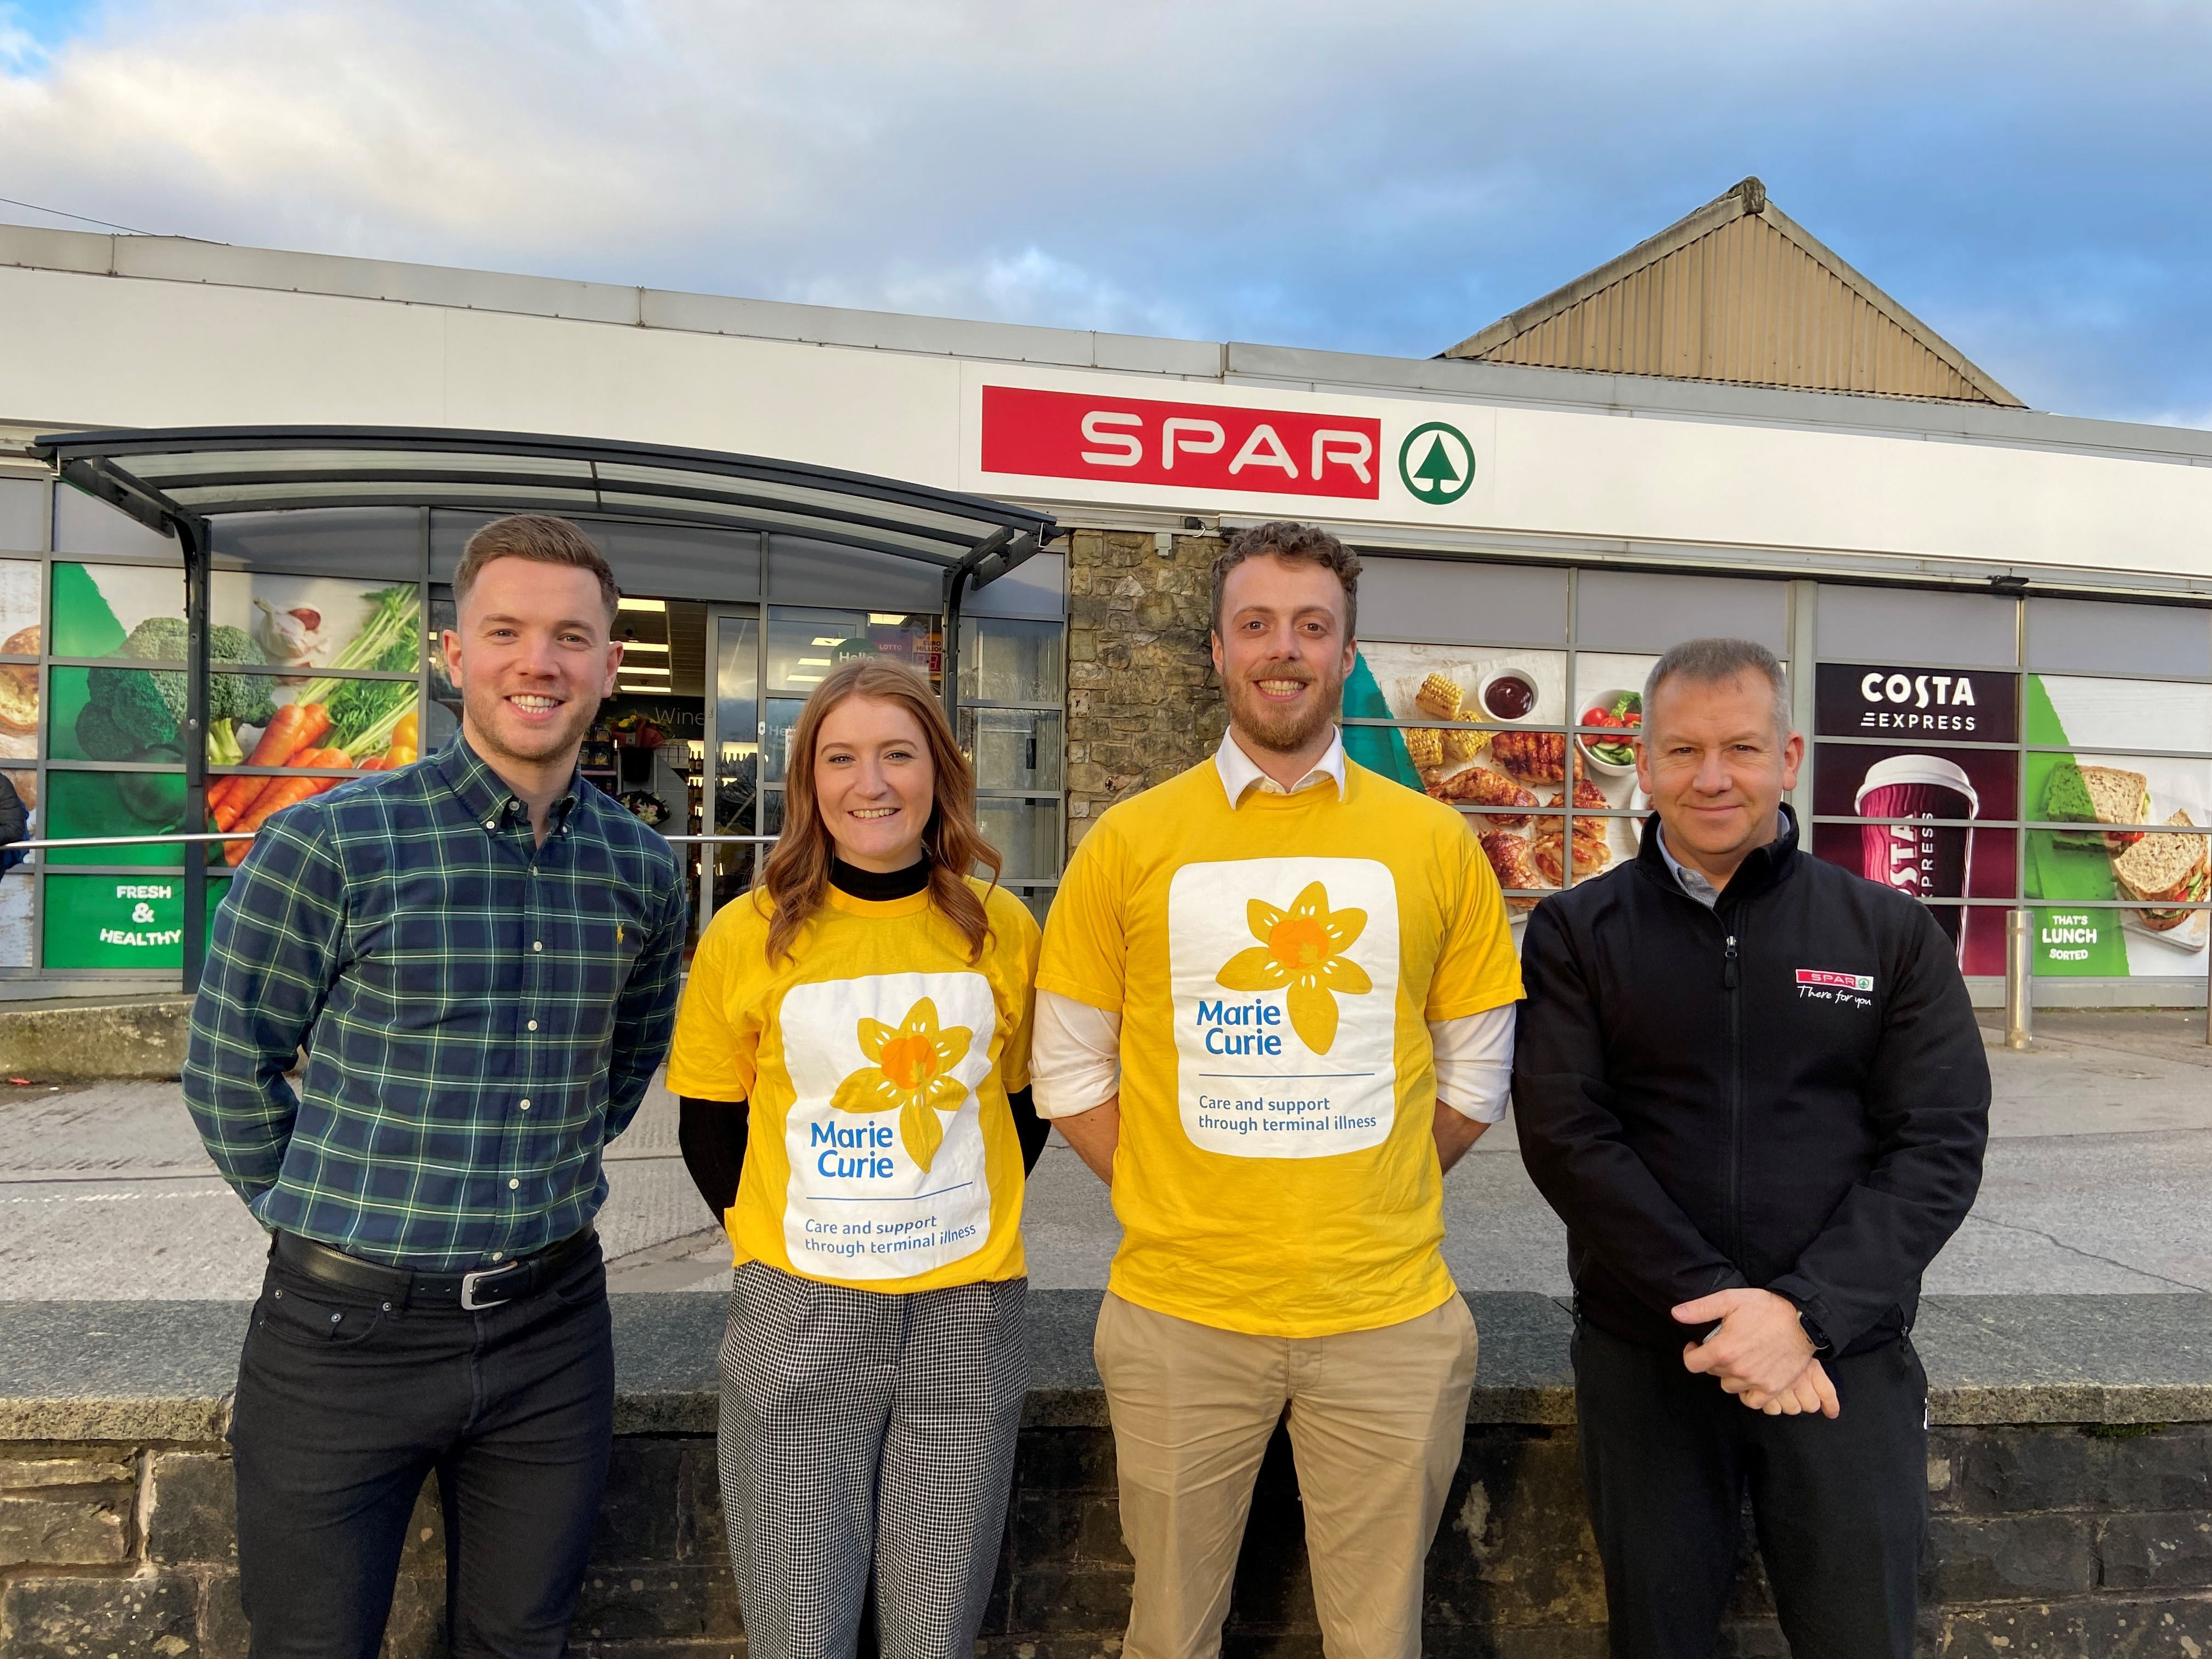 SPAR retailers celebrated for supporting Marie Curie Nurses with one million PPE items during pandemic